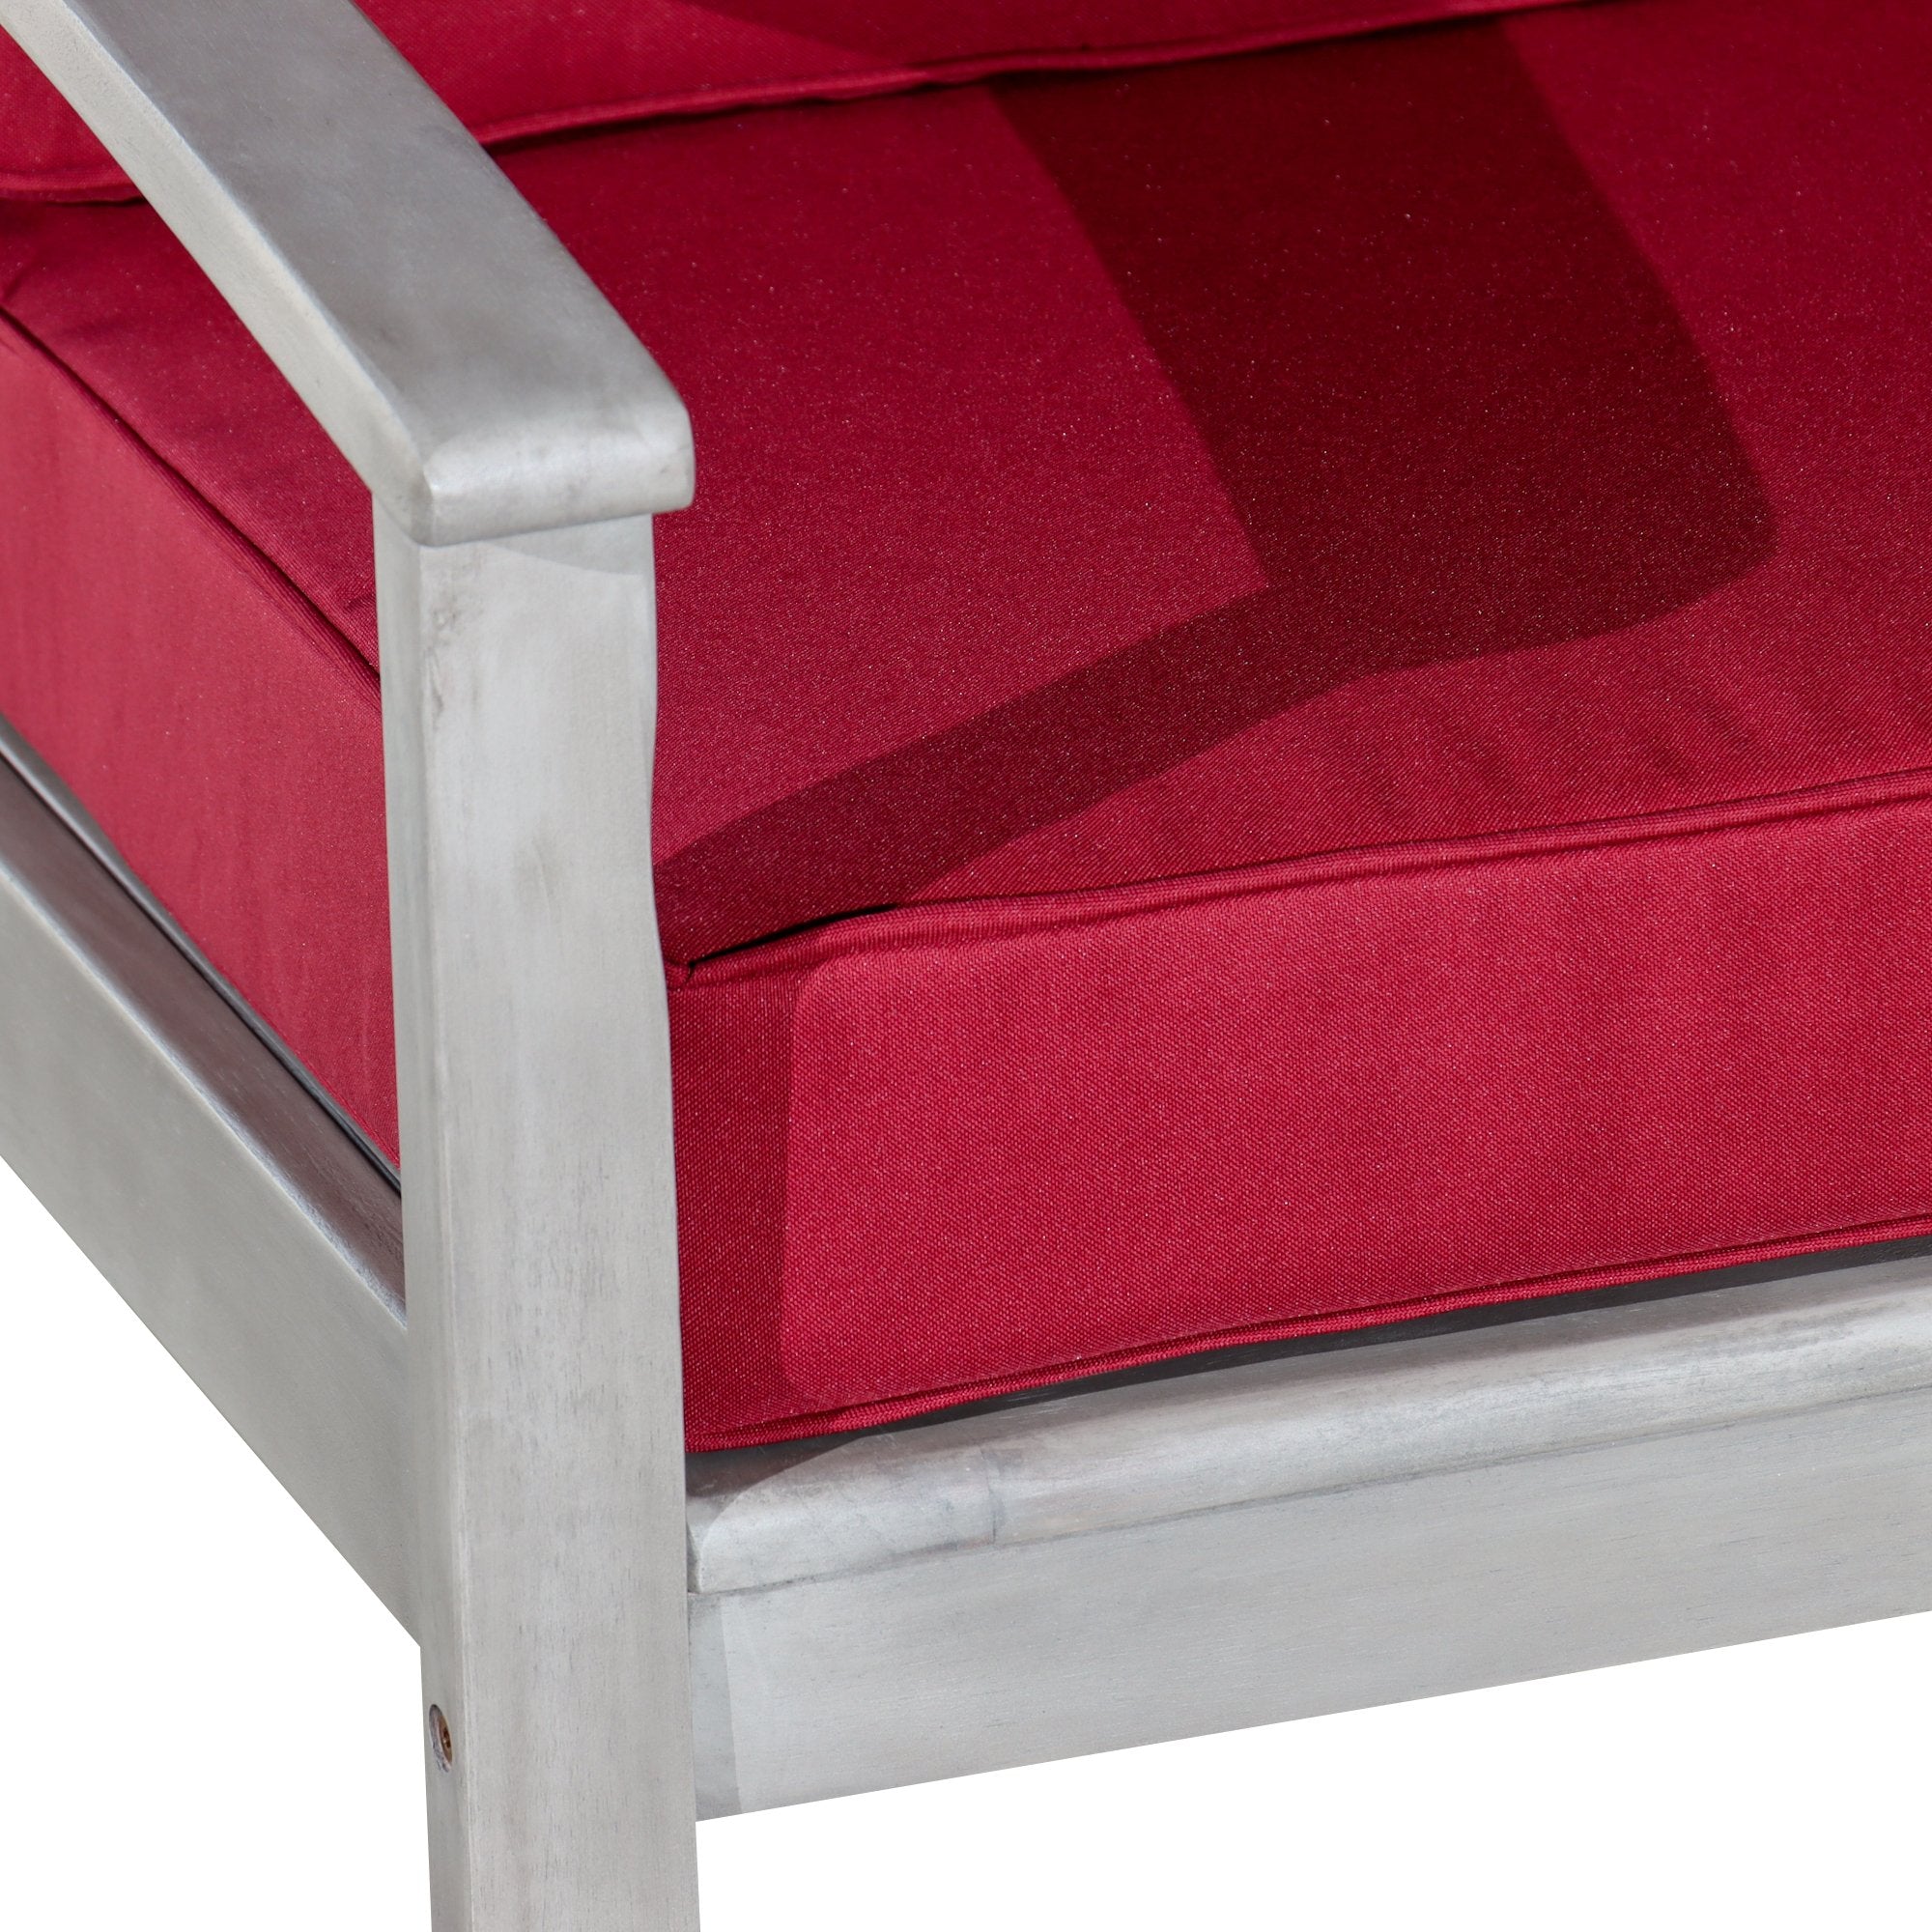 Deep Seat Outdoor Chair Silver Gray Finish, Burgundy Cushion - Tuesday Morning-Chairs & Seating